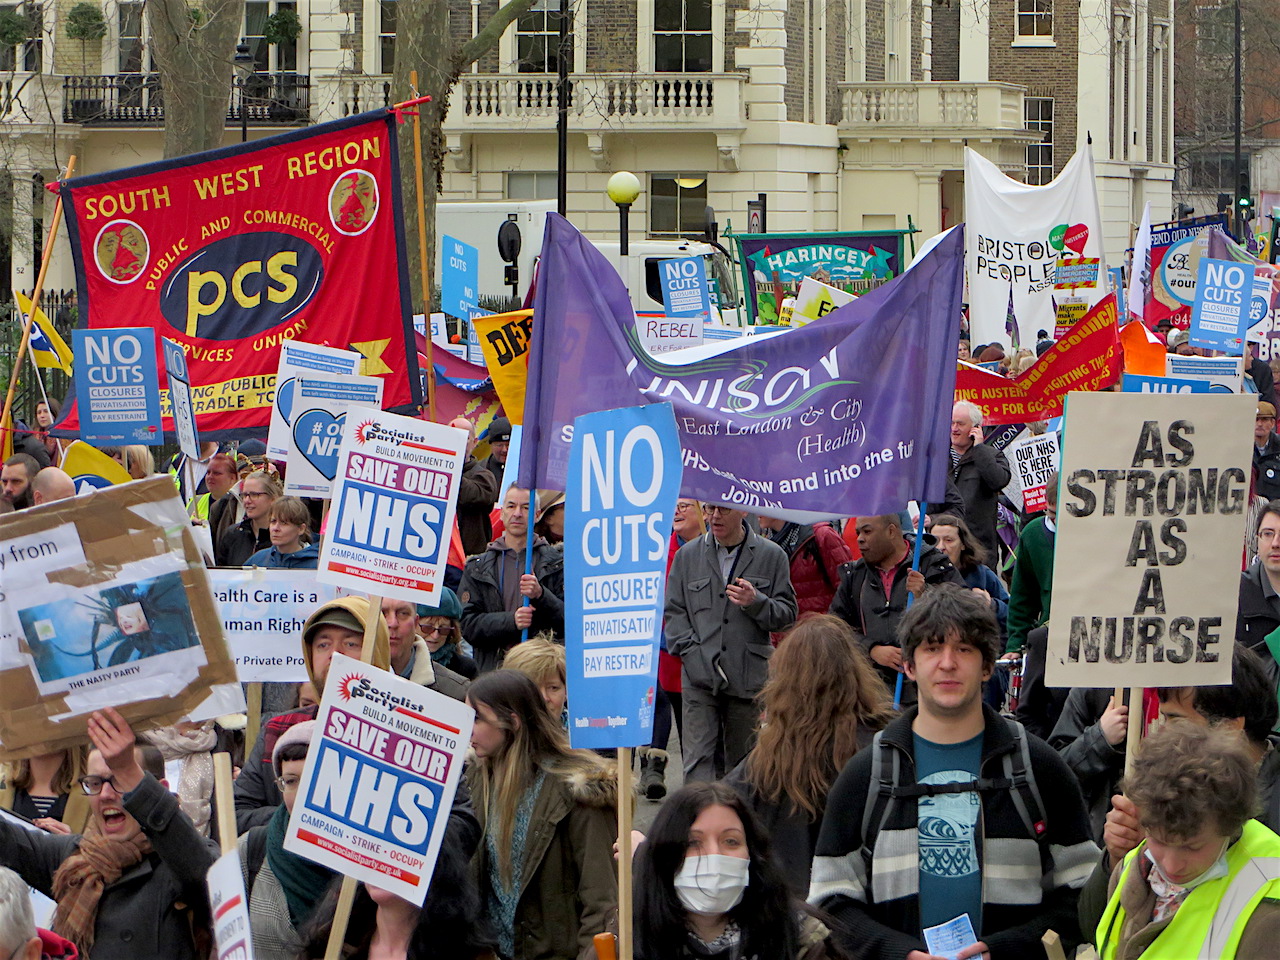 A photo from the march for the NHS on March 4, 2017 (Photo: Andy Worthington).